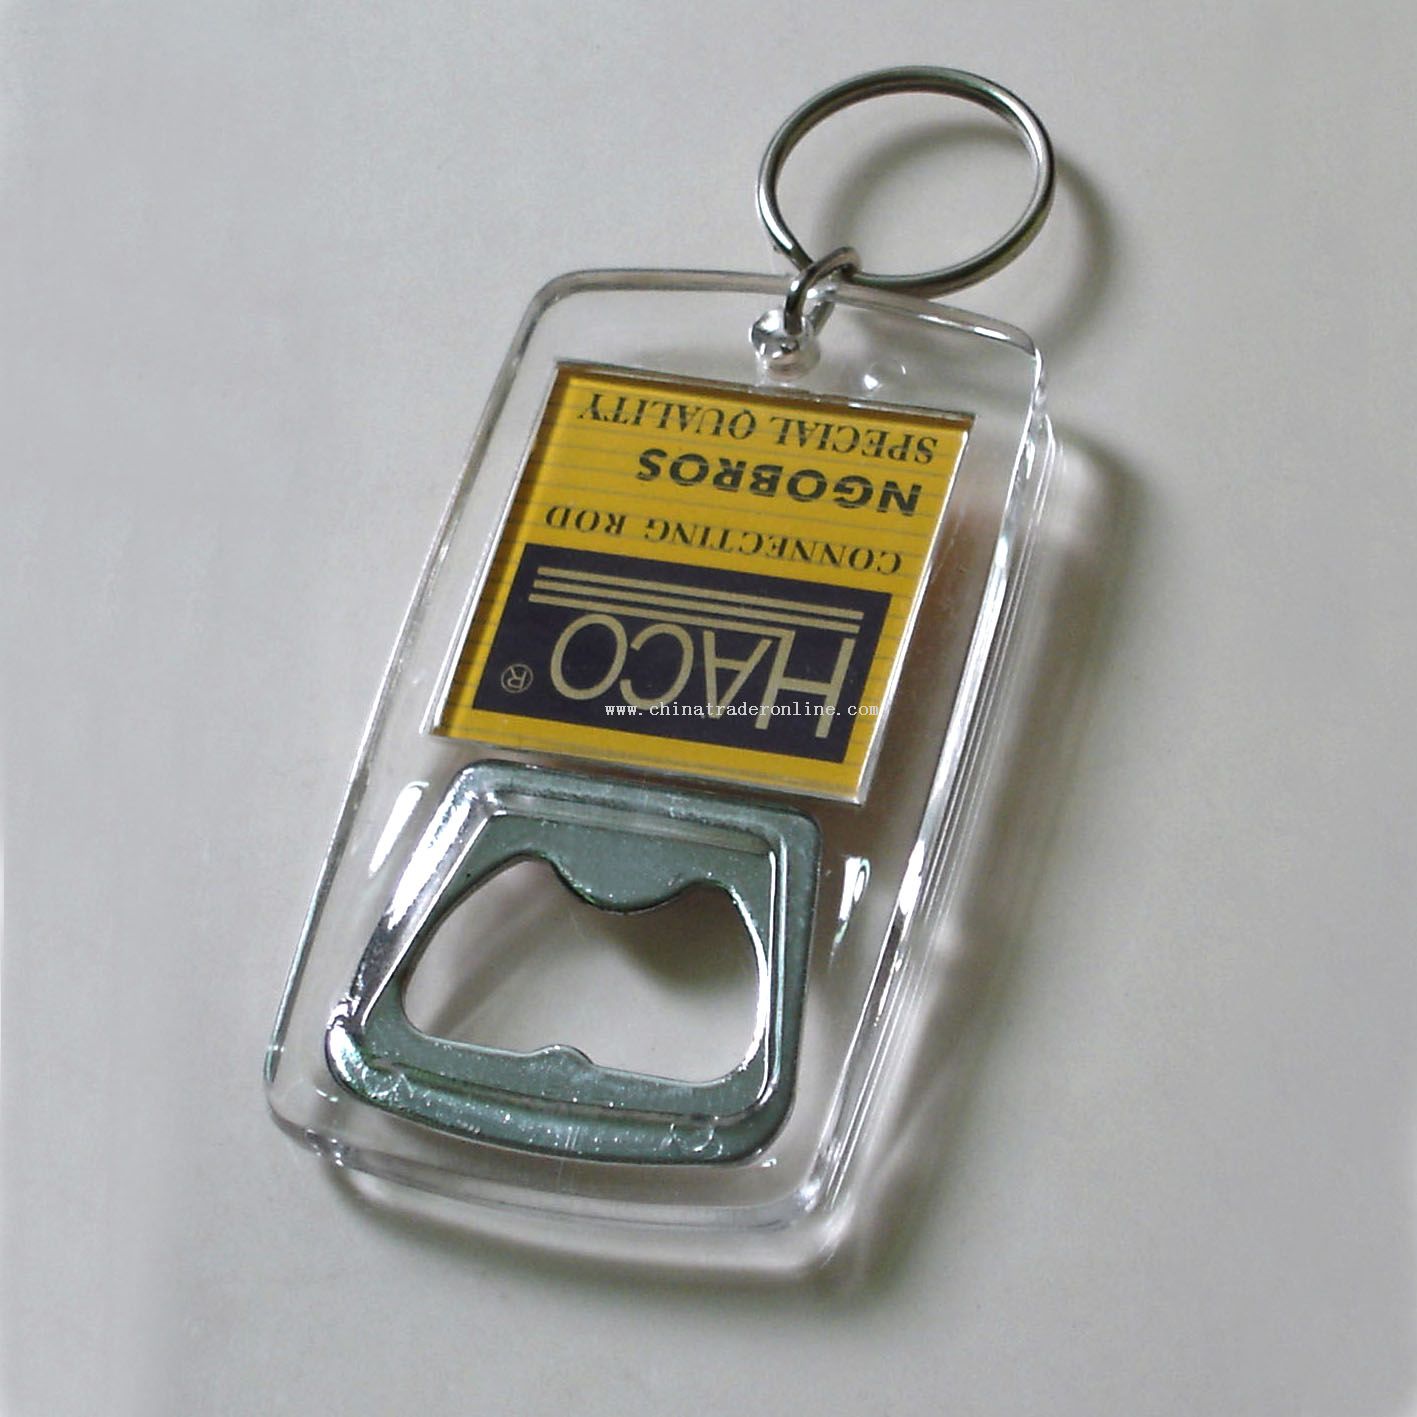 Acrylic opener with cover